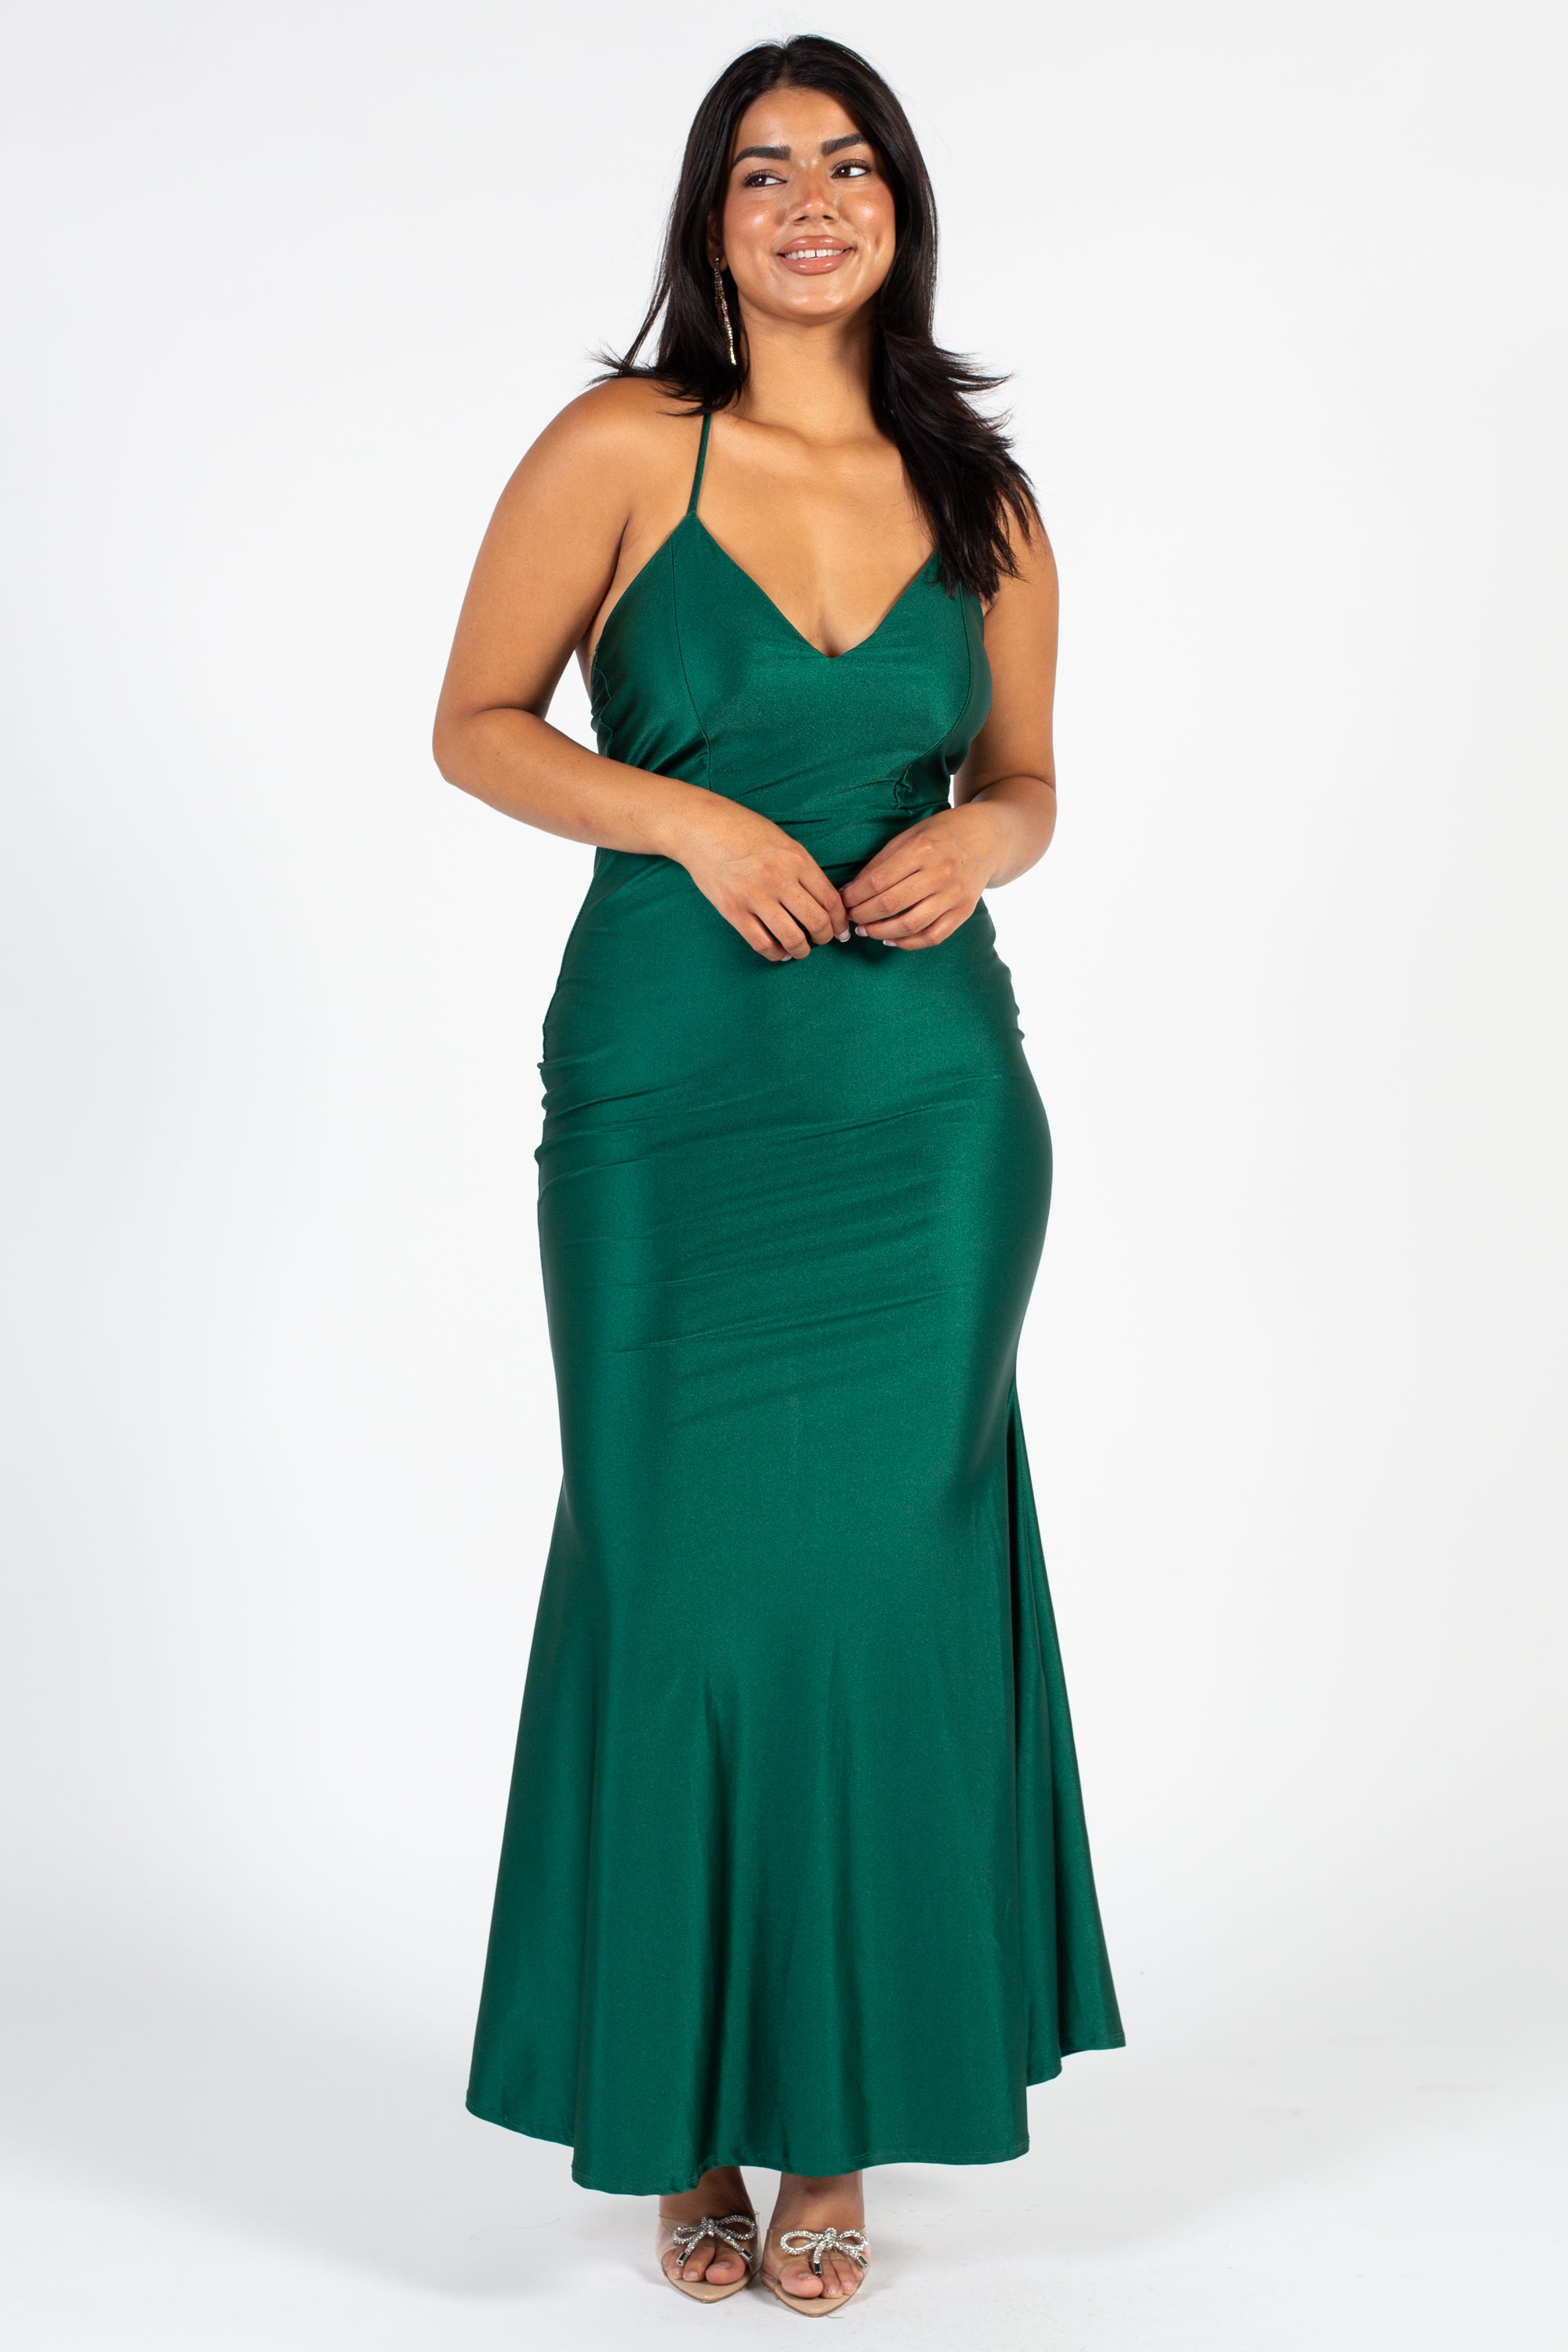 All That Shimmers Mermaid Maxi Dress